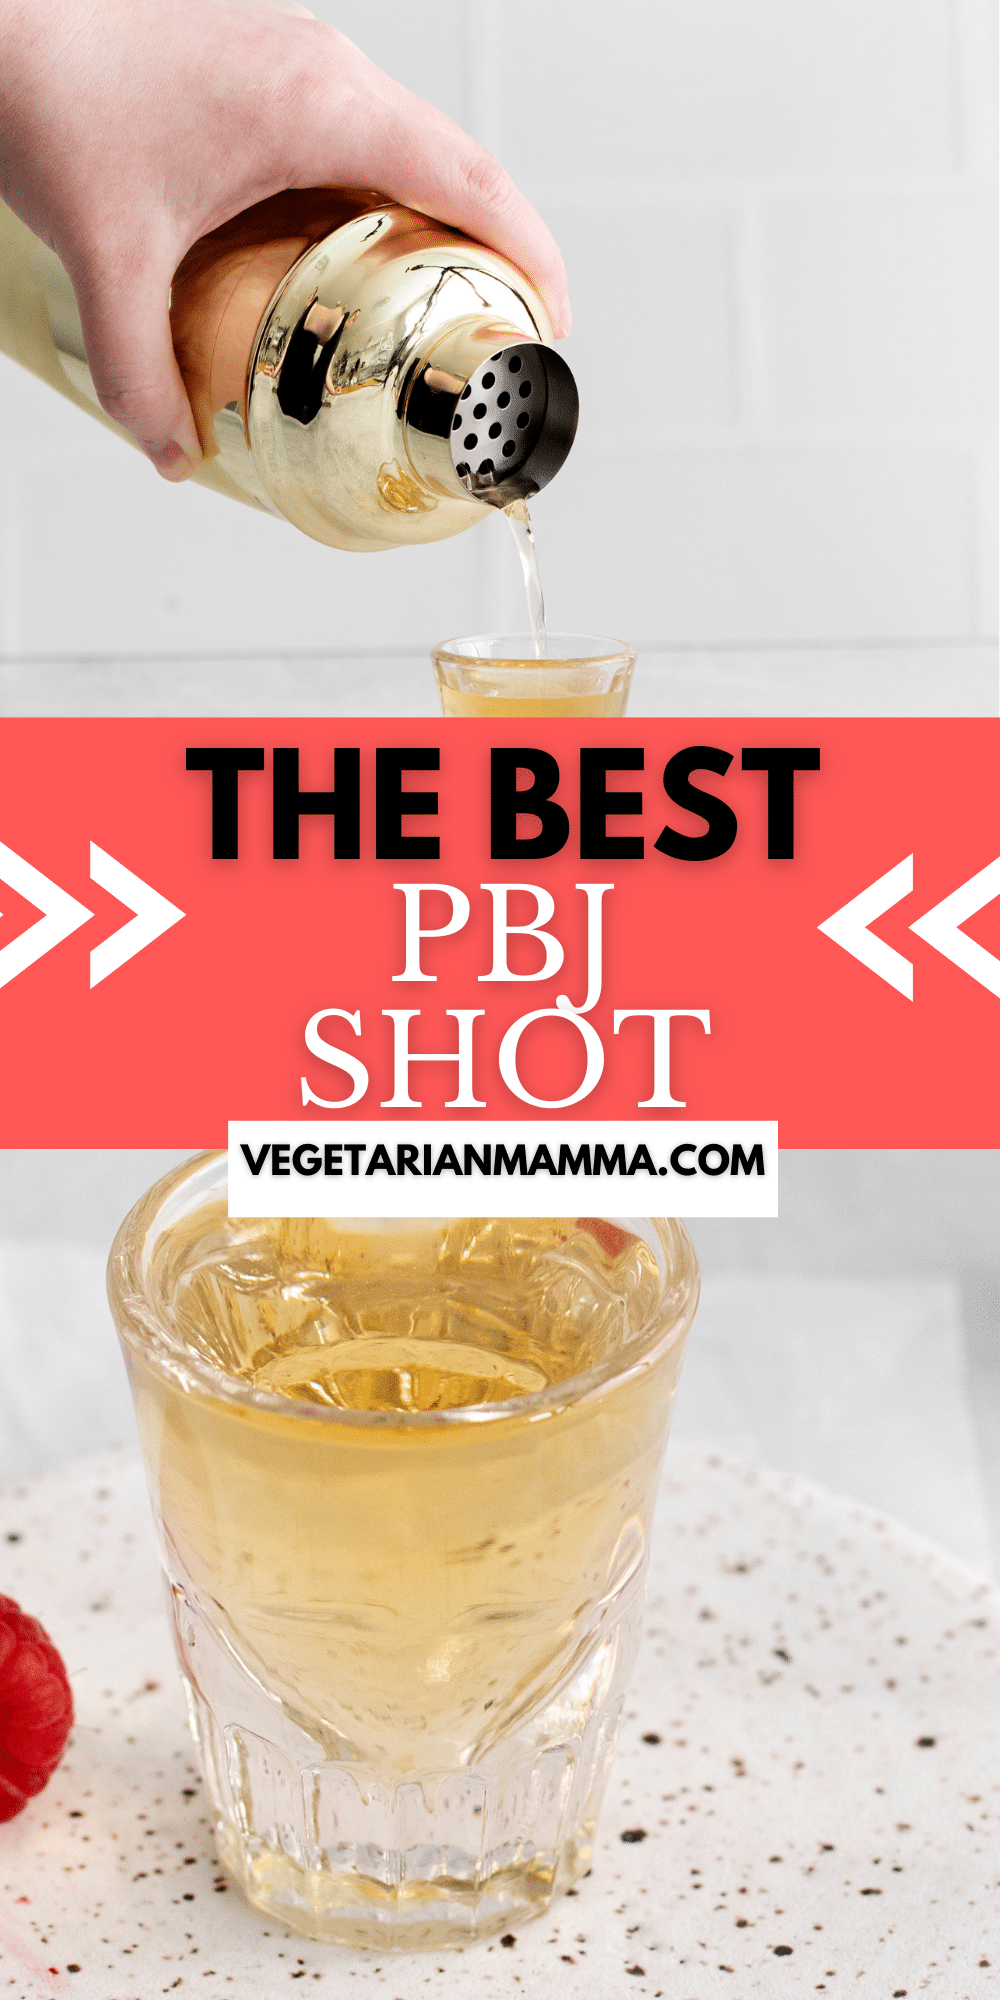 This peanut butter jelly shot is a fun two-ingredient shot that will certainly get the party started! This fruity, nutty shot is completely delicious and simple to make!